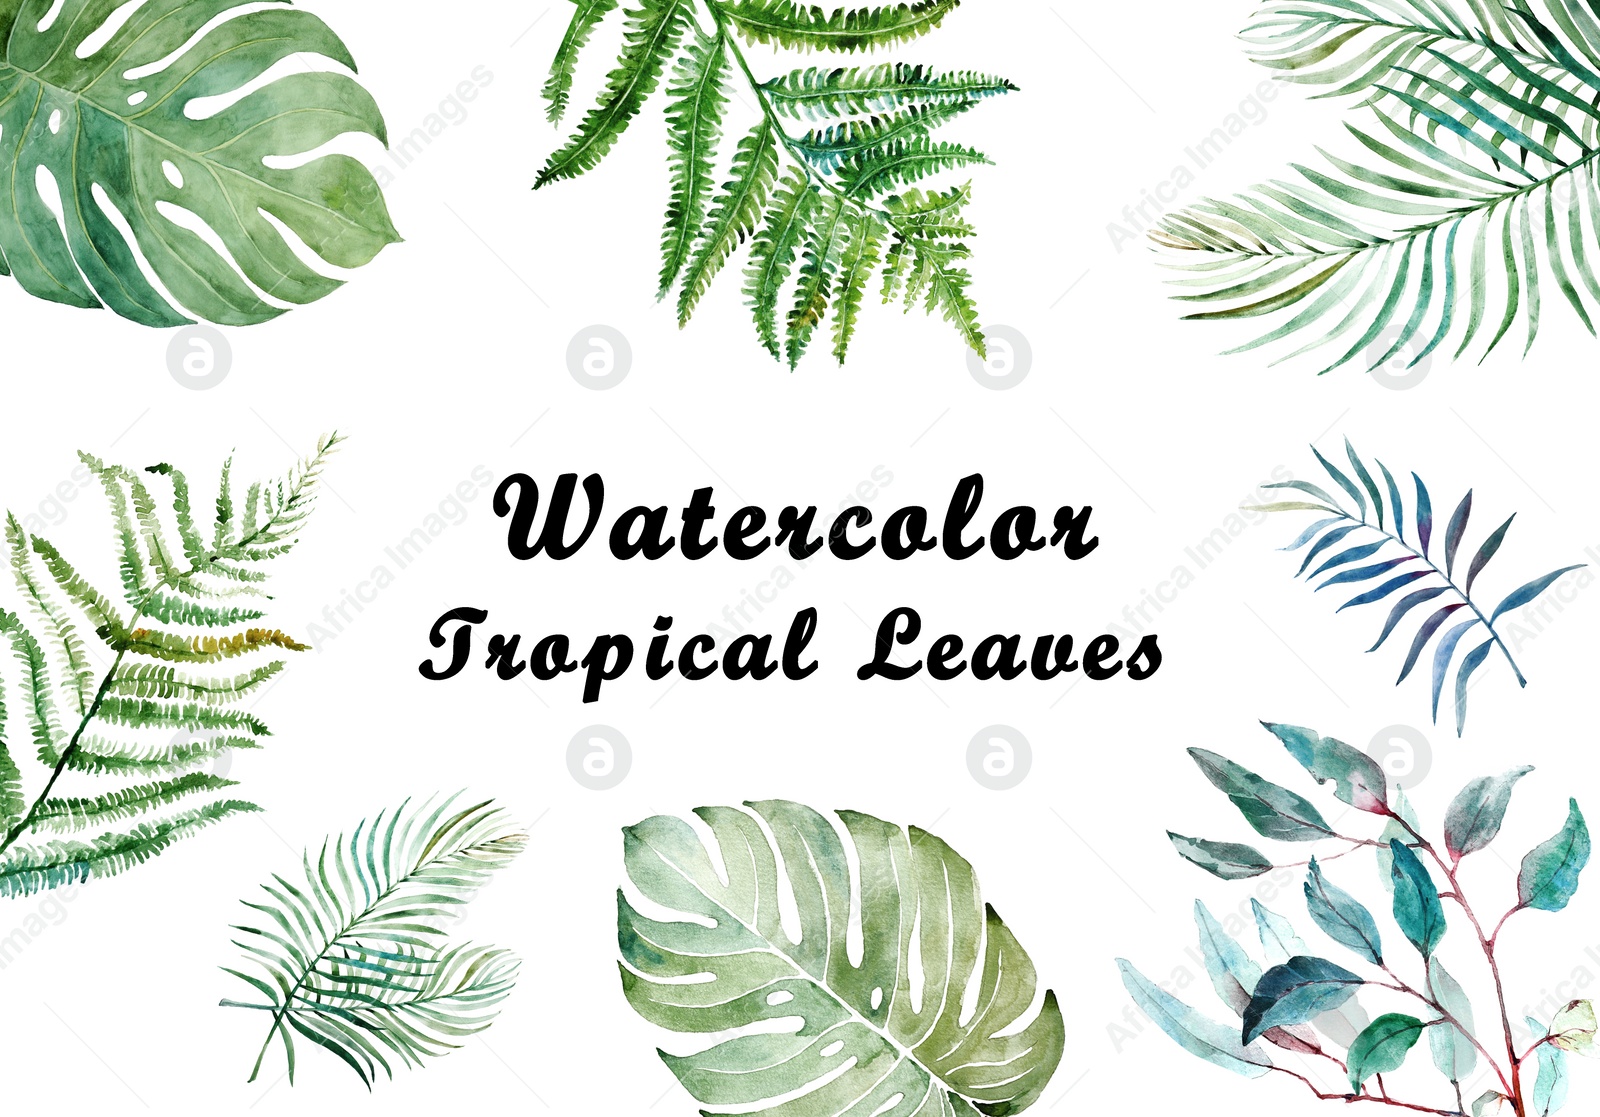 Image of Set of watercolor tropical leaves on white background 